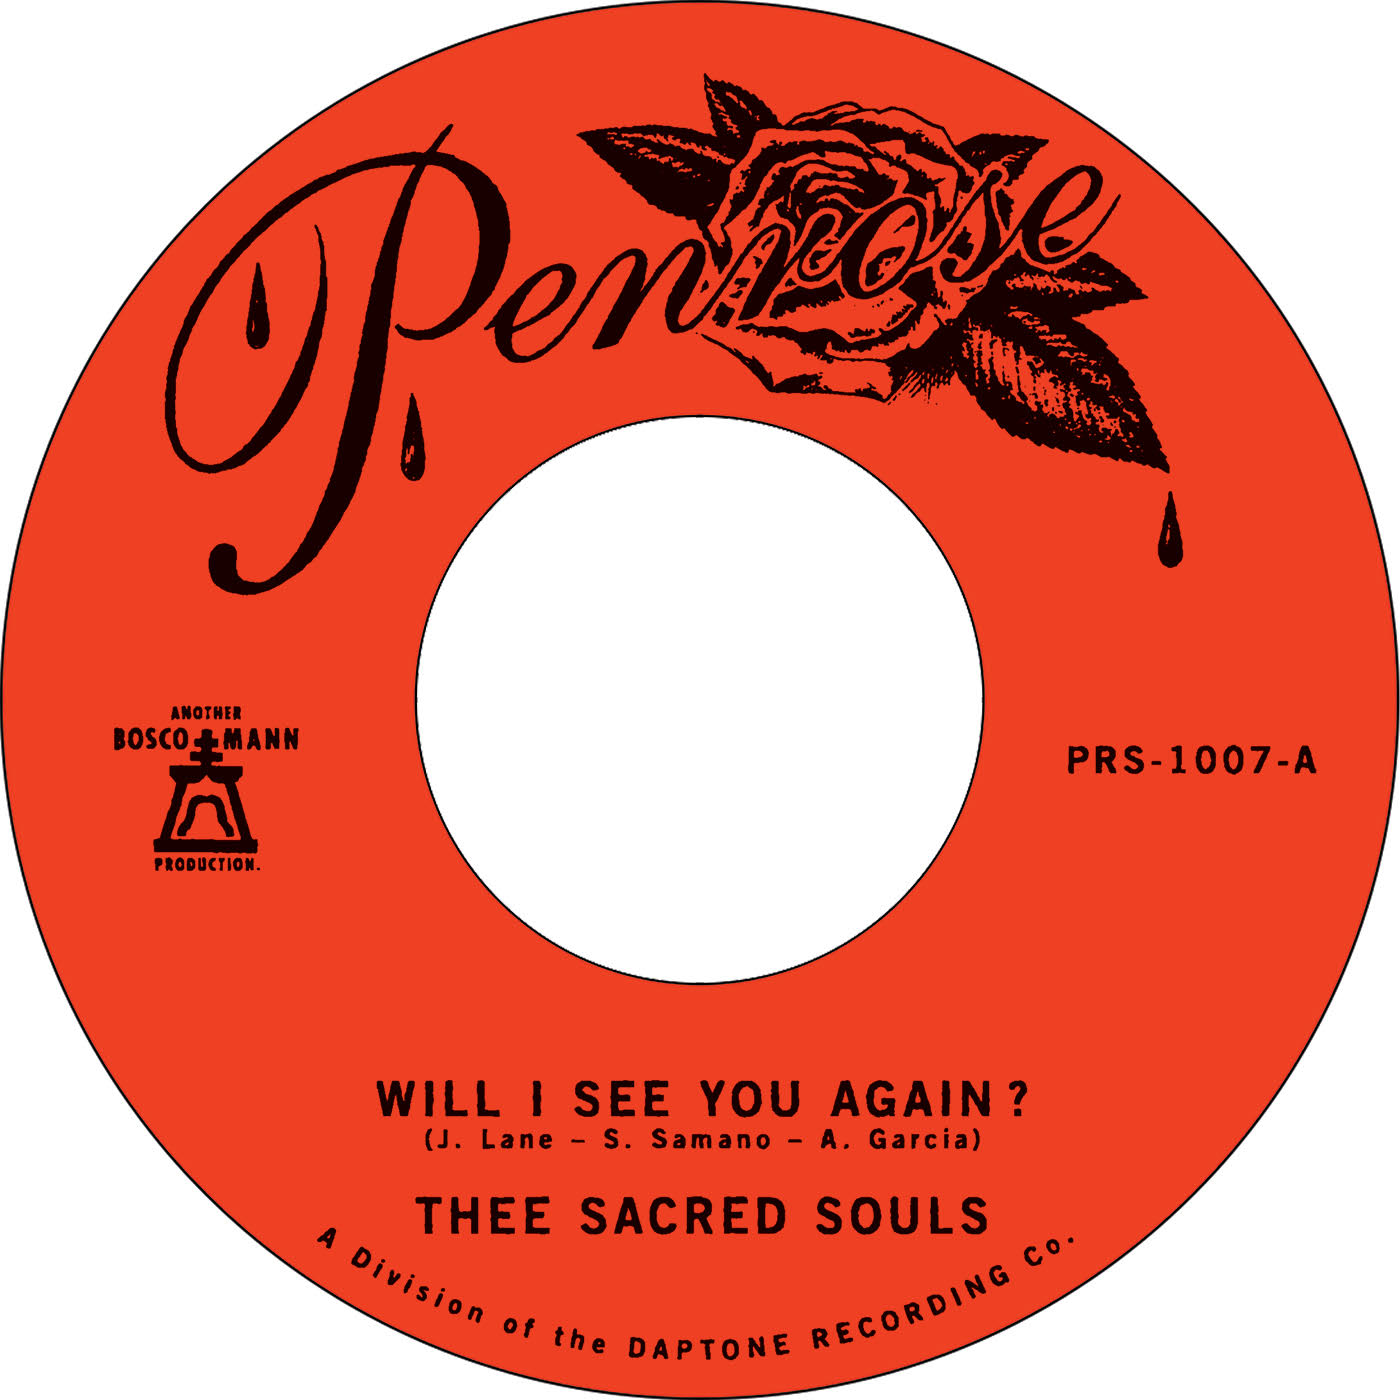 Thee Sacred Souls - "Will I See You Again" / "Its Our Love" 45